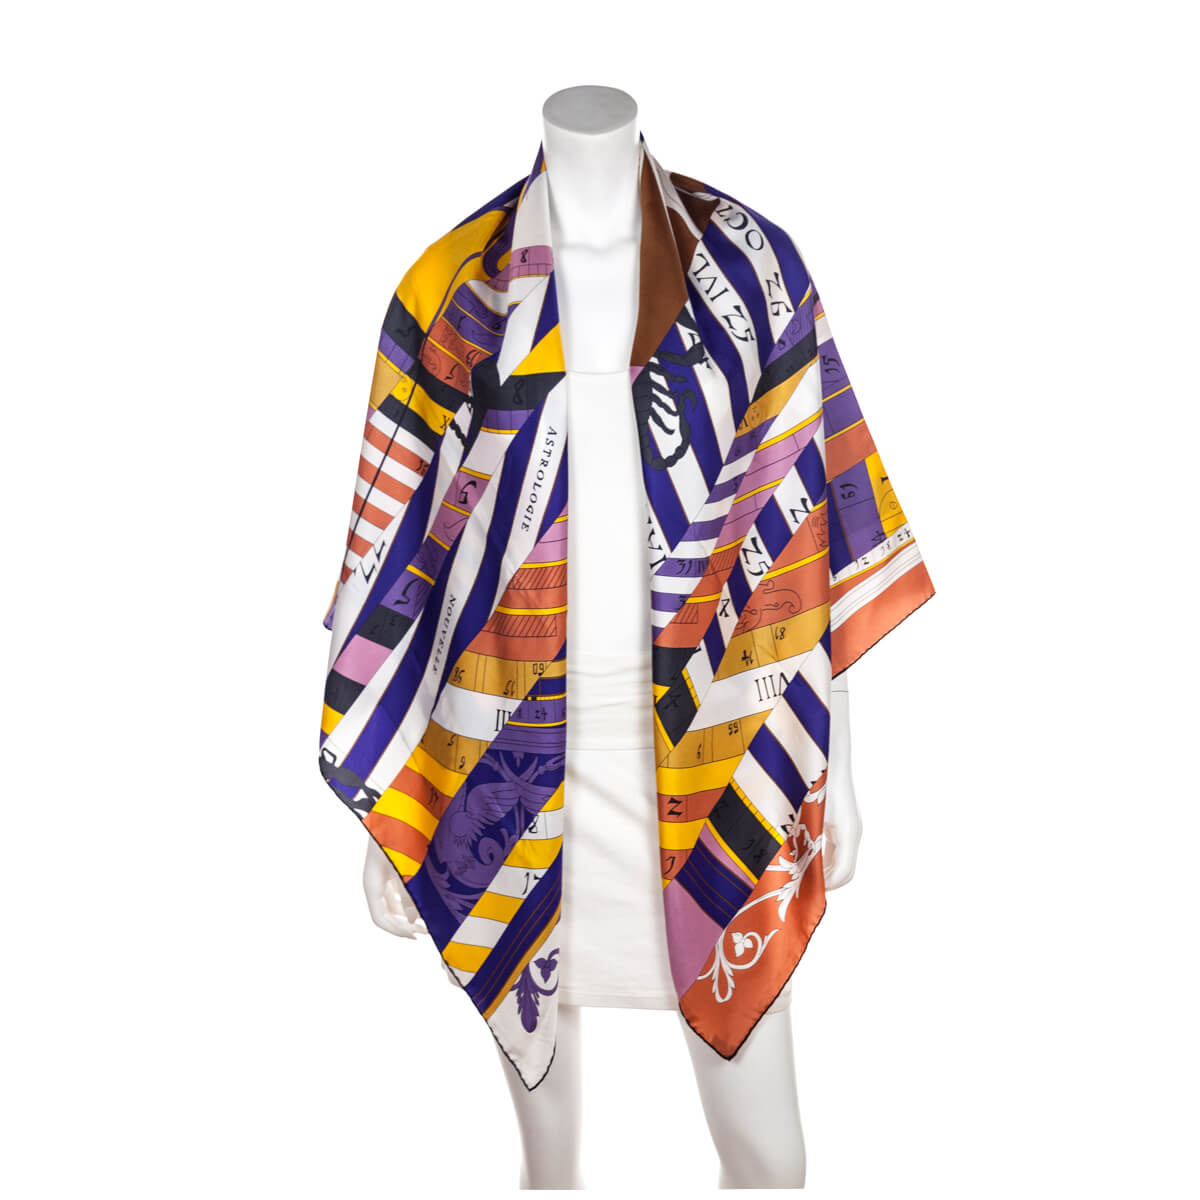 Hermes Purple & Yellow Astrologie Nouvelle Silk Carre Geant Scarf - Love that Bag etc - Preowned Authentic Designer Handbags & Preloved Fashions